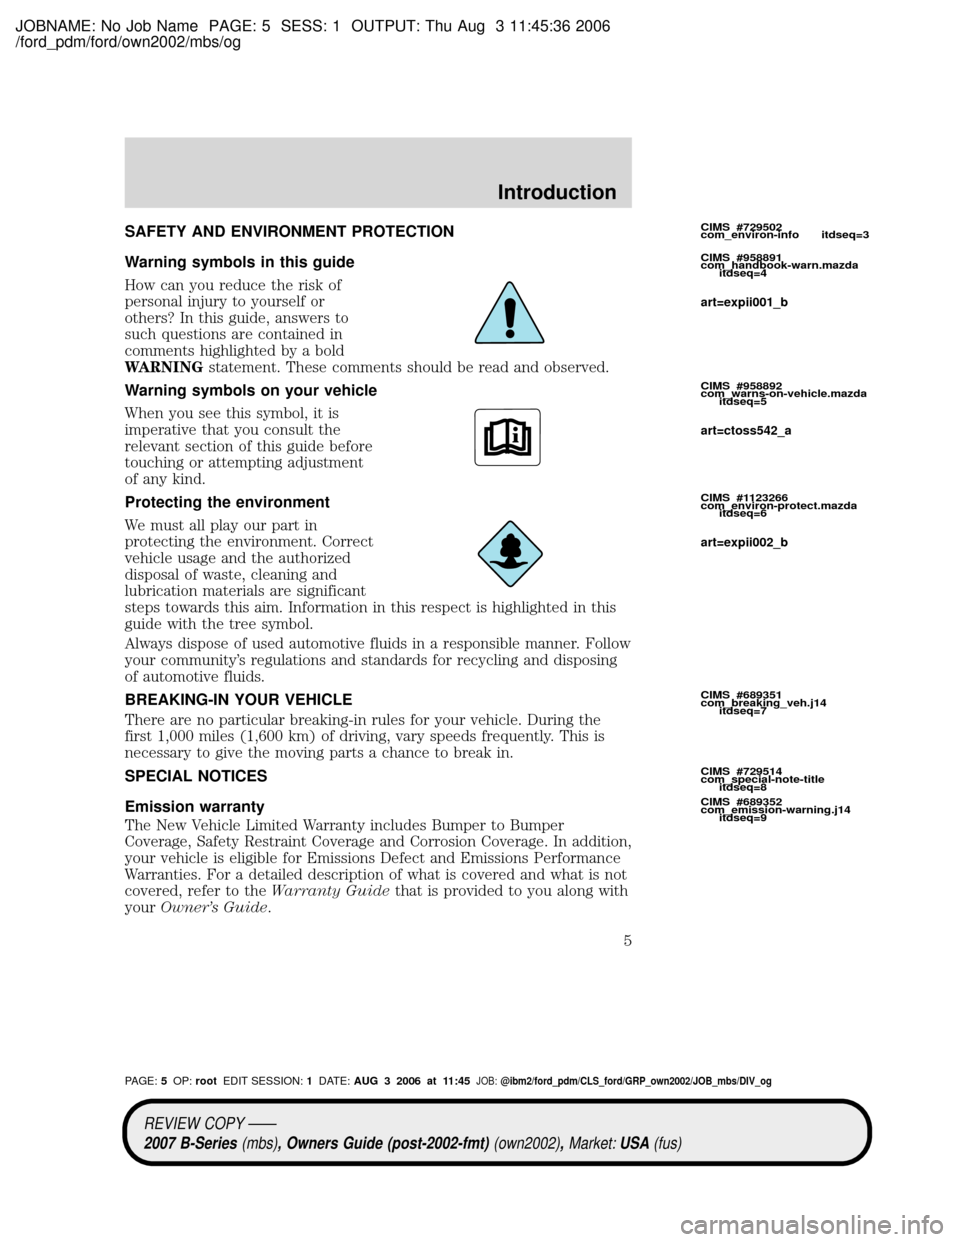 MAZDA MODEL B2300 TRUCK 2007  Owners Manual (in English) JOBNAME: No Job Name PAGE: 5 SESS: 1 OUTPUT: Thu Aug 3 11:45:36 2006
/ford_pdm/ford/own2002/mbs/og
SAFETY AND ENVIRONMENT PROTECTION
Warning symbols in this guide
How can you reduce the risk of
person